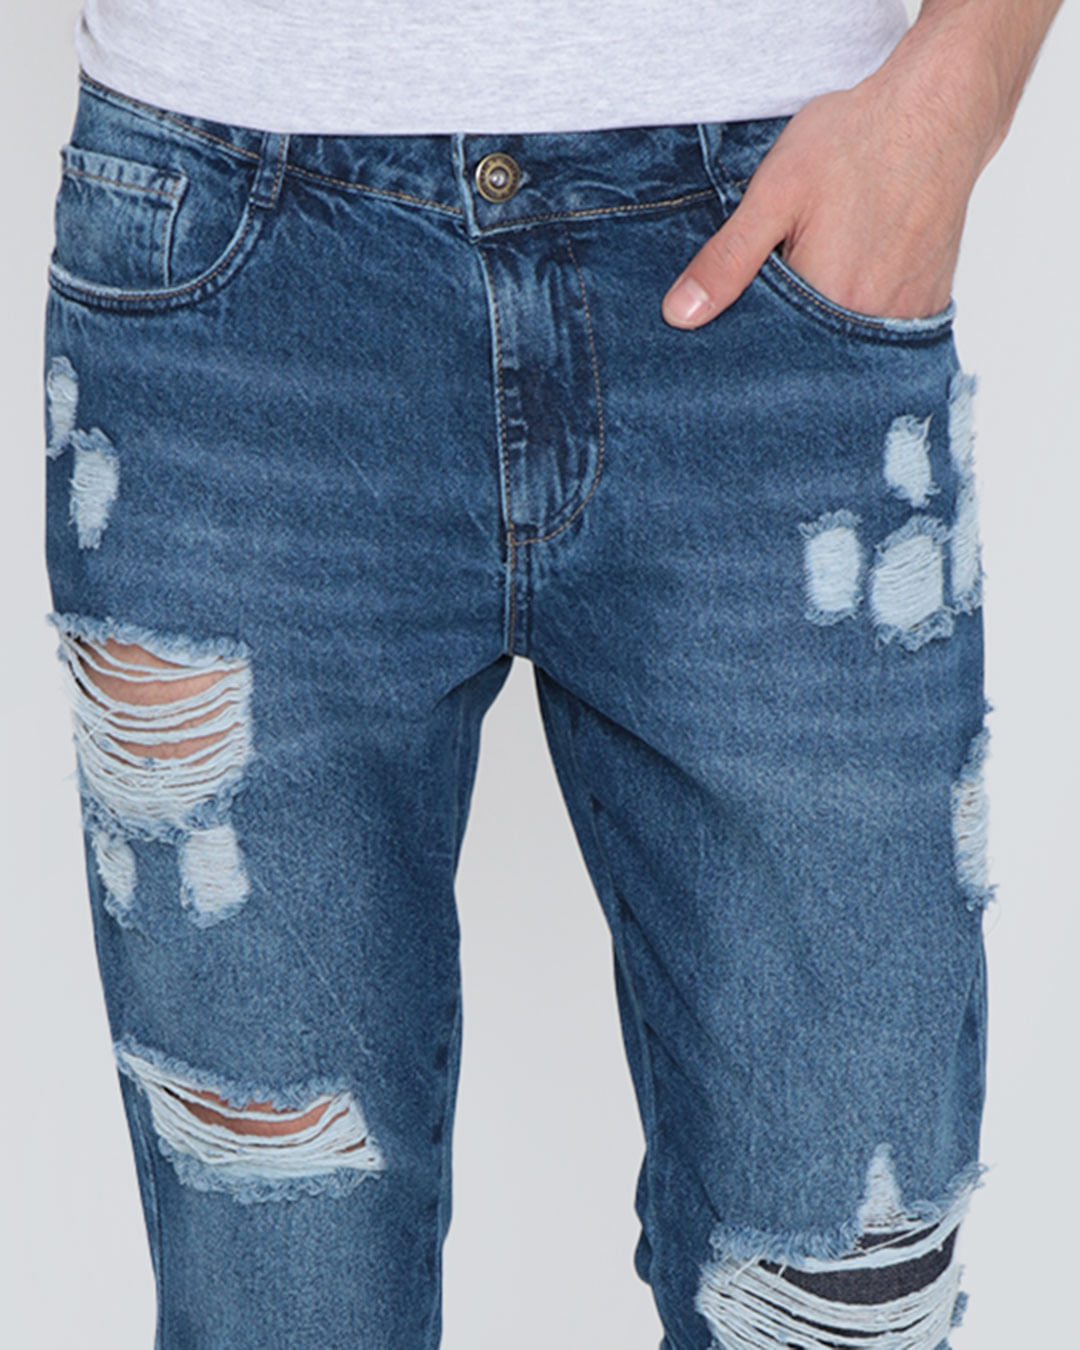 Calca-Jeans-Masculina-Destroyed-Azul-